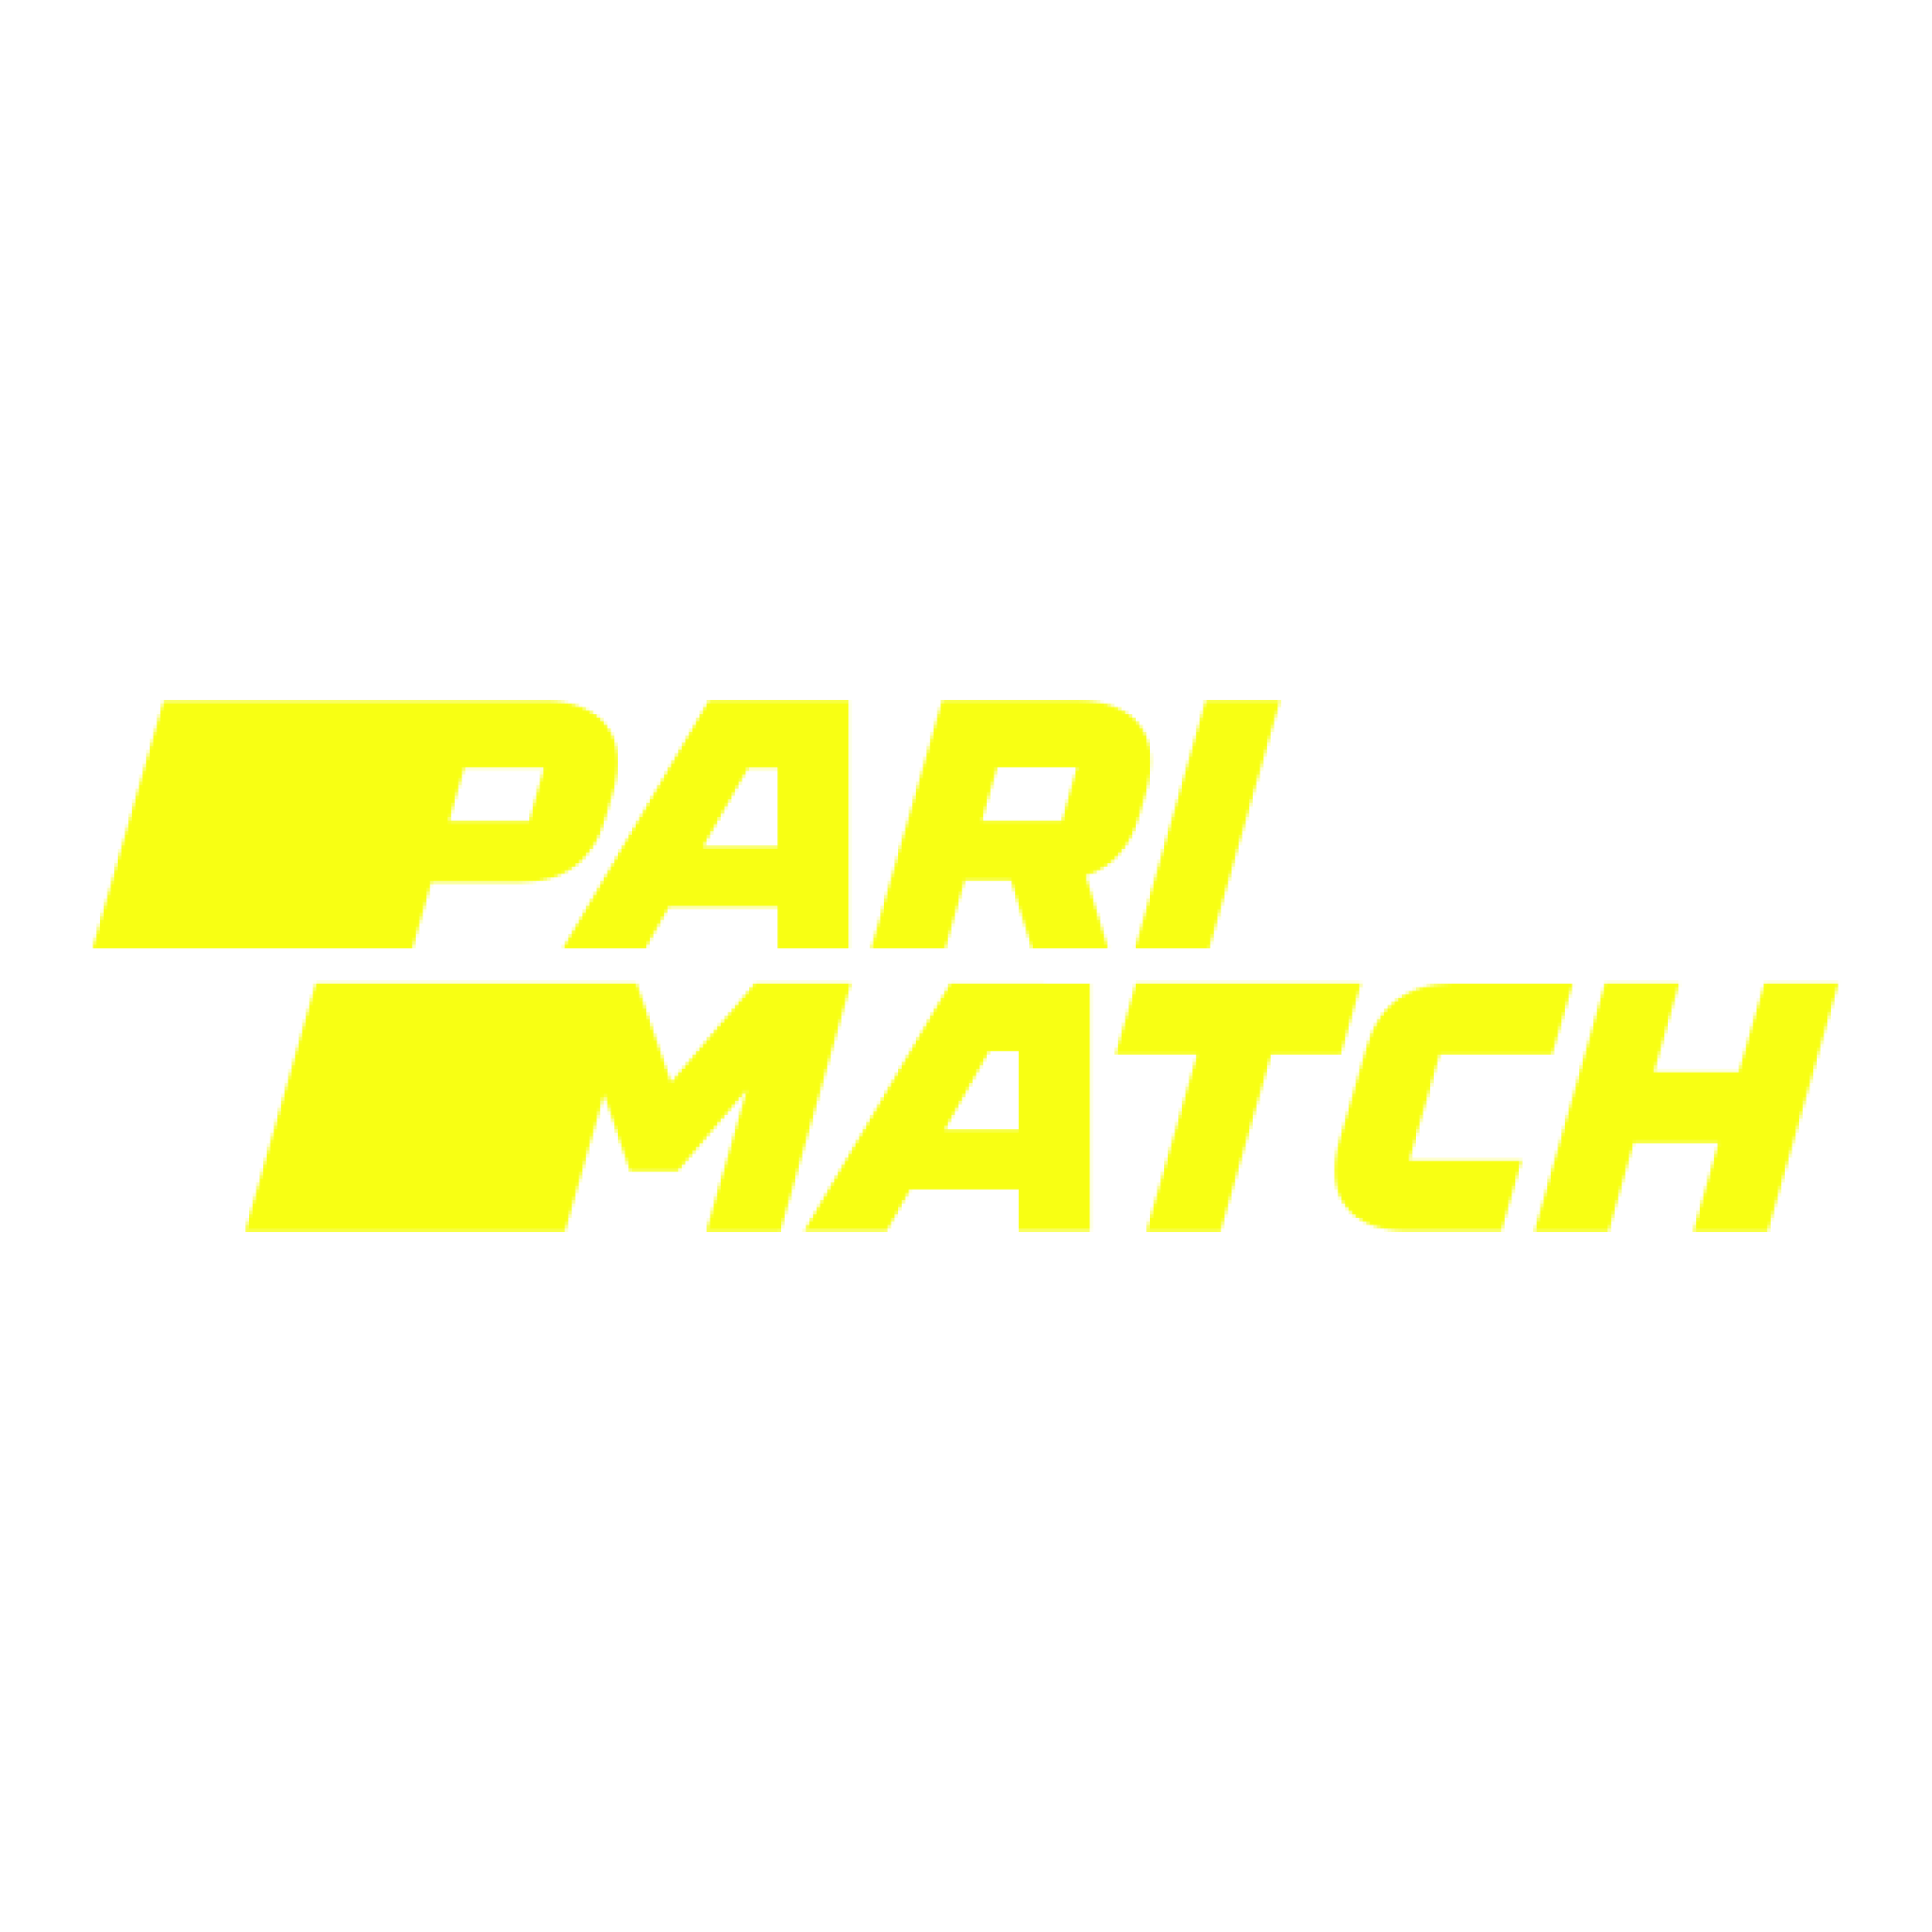 Cricket betting with Parimatch is safe for Indian players.